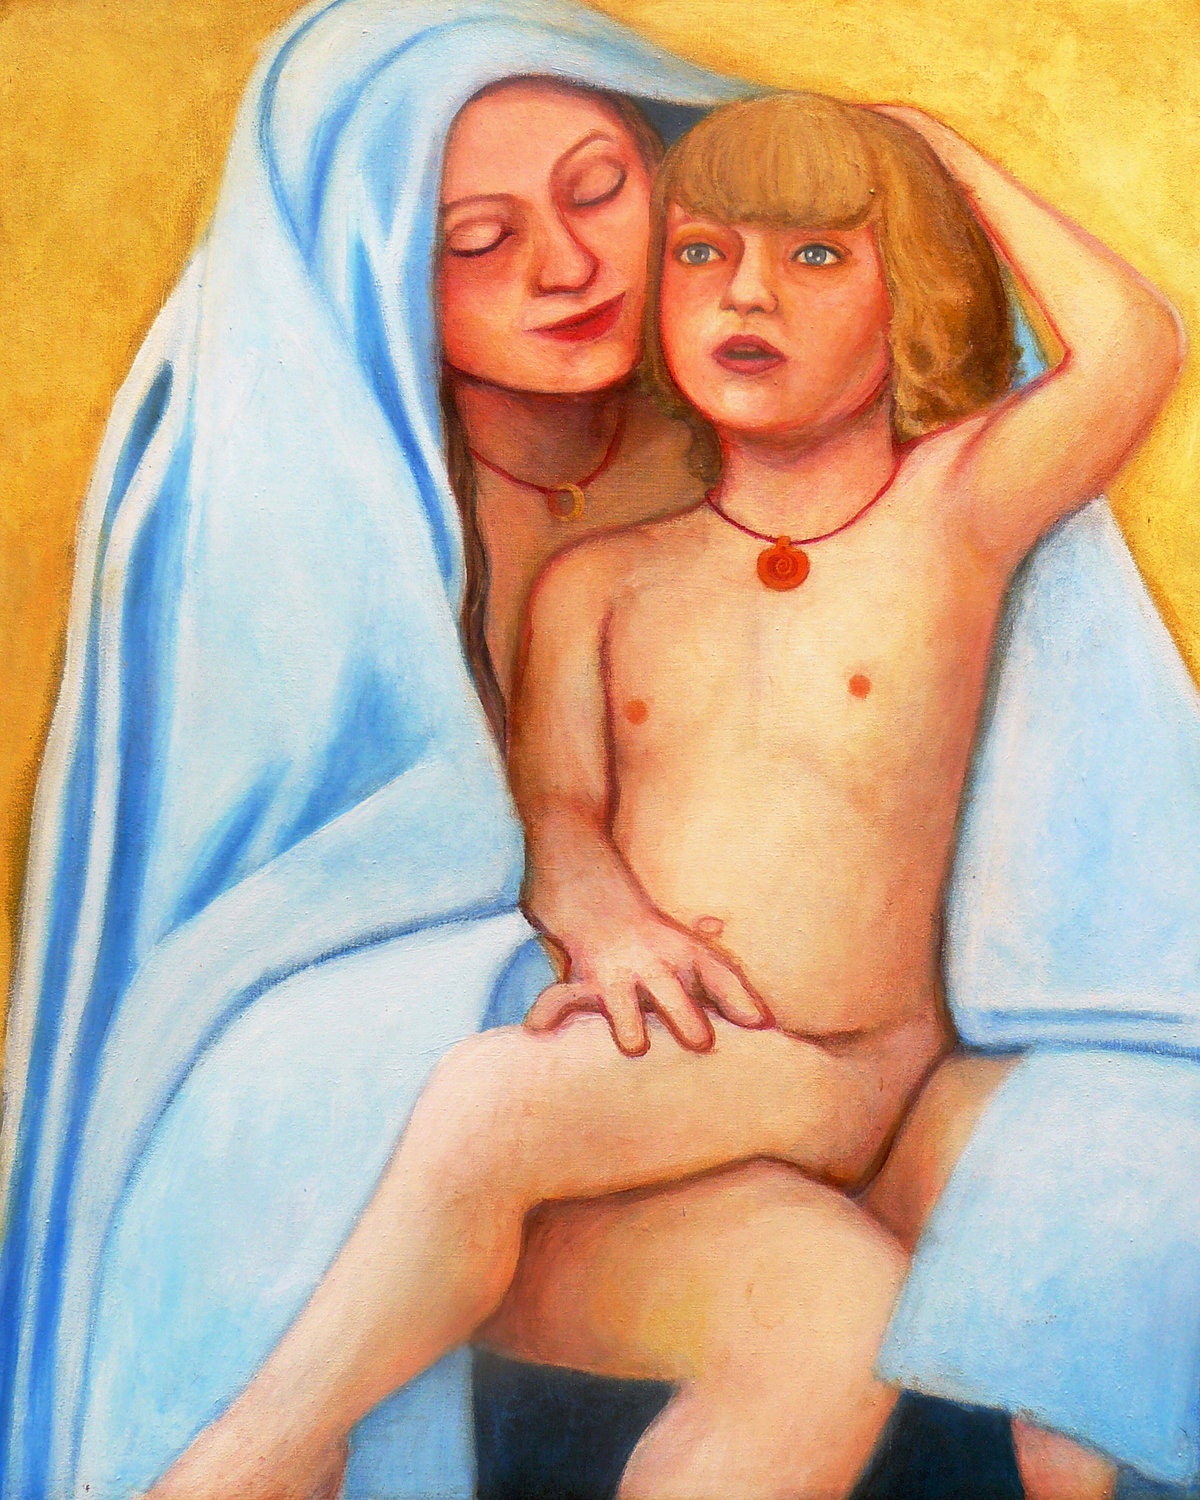 Mary and Child 8 x 10  Giclee Canvas Print Reproduction by Deenie Wallace